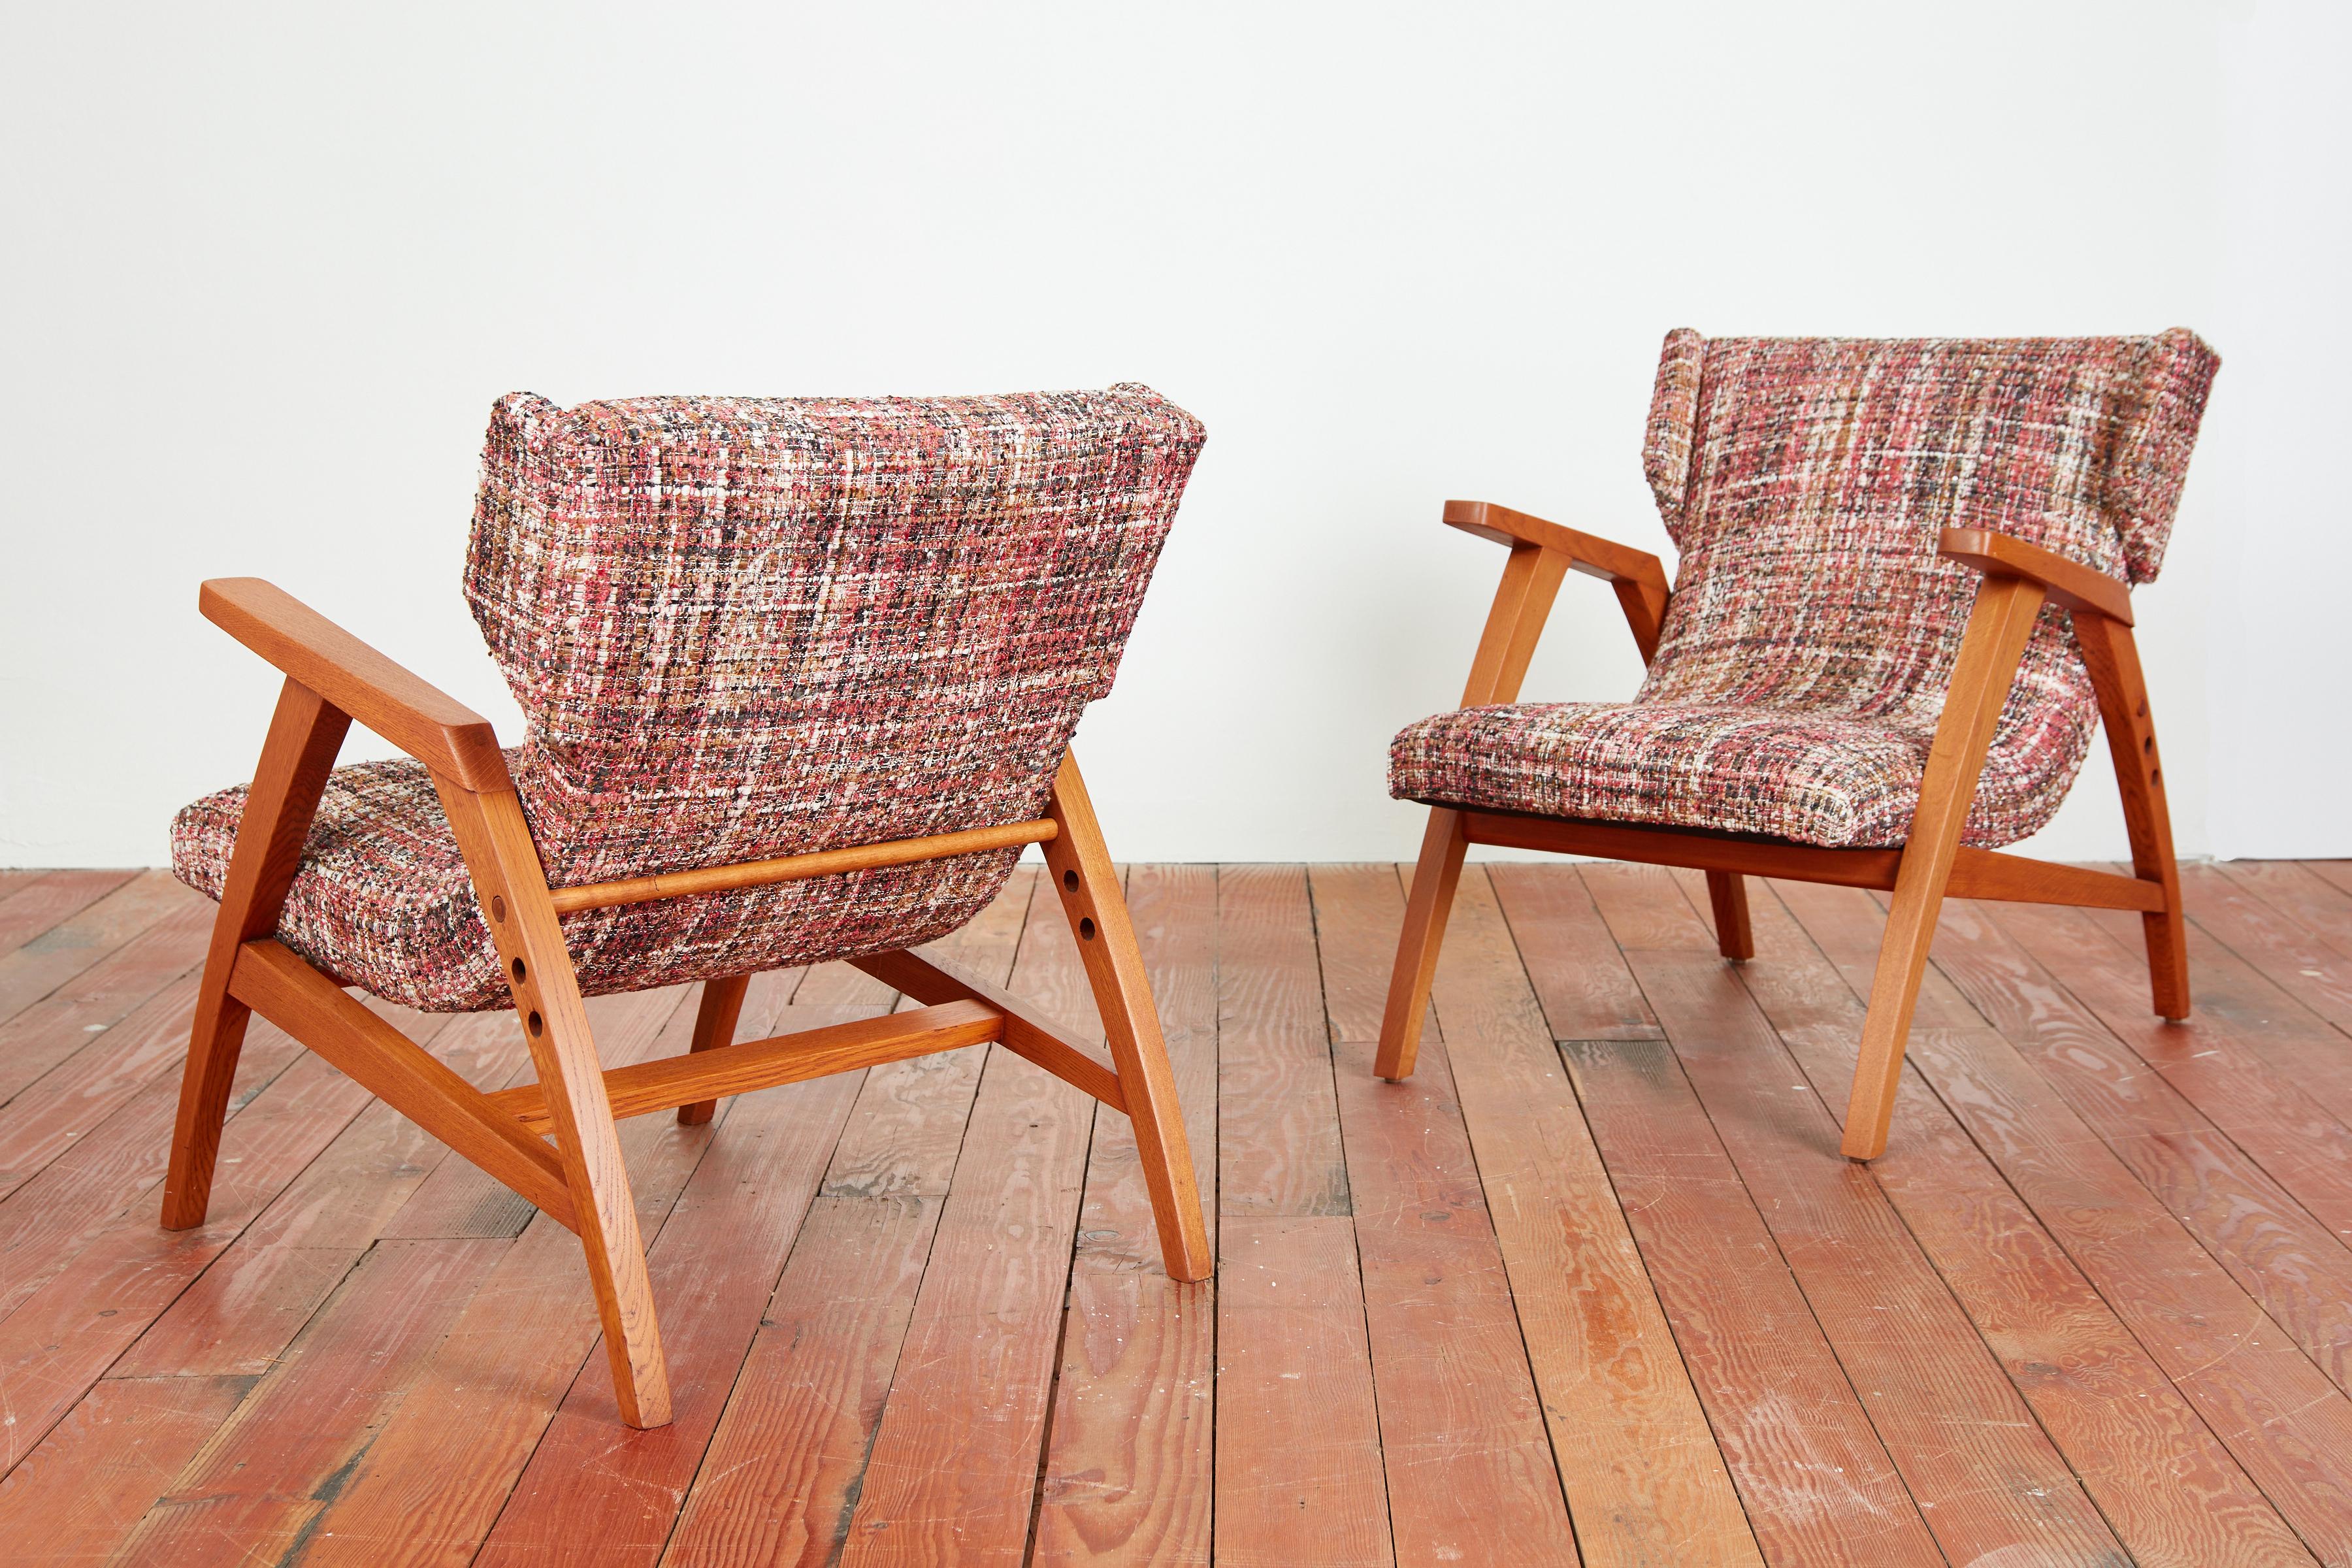 Wonderful pair of French Oak chairs with wingback floating seats - newly upholstered in 